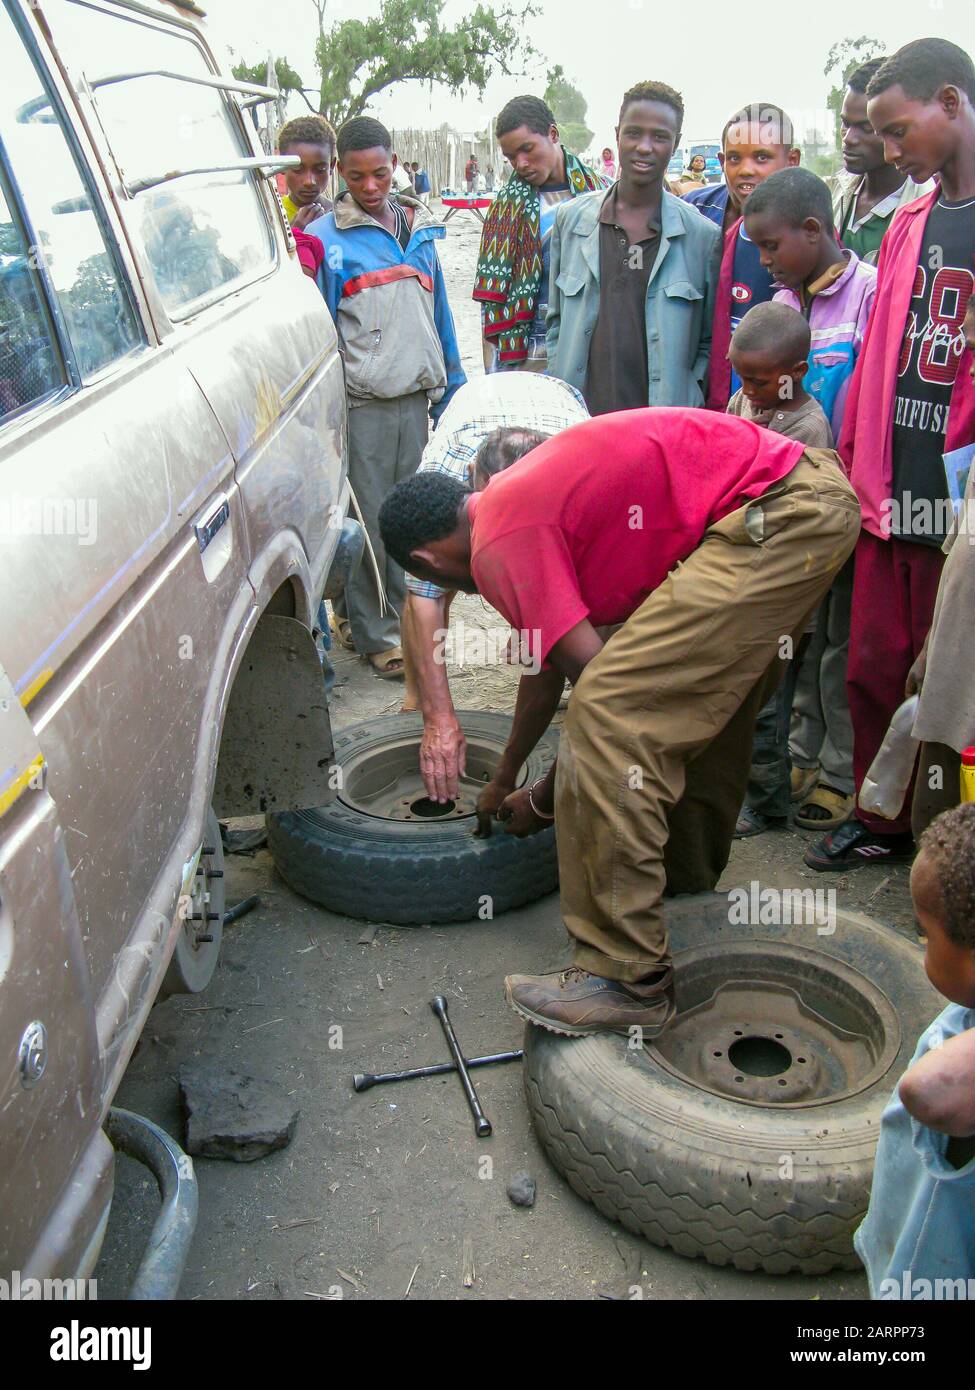 Local Ethiopians look with curiosity at the repair of the rear wheel in a jeep. Ethiopia. Stock Photo